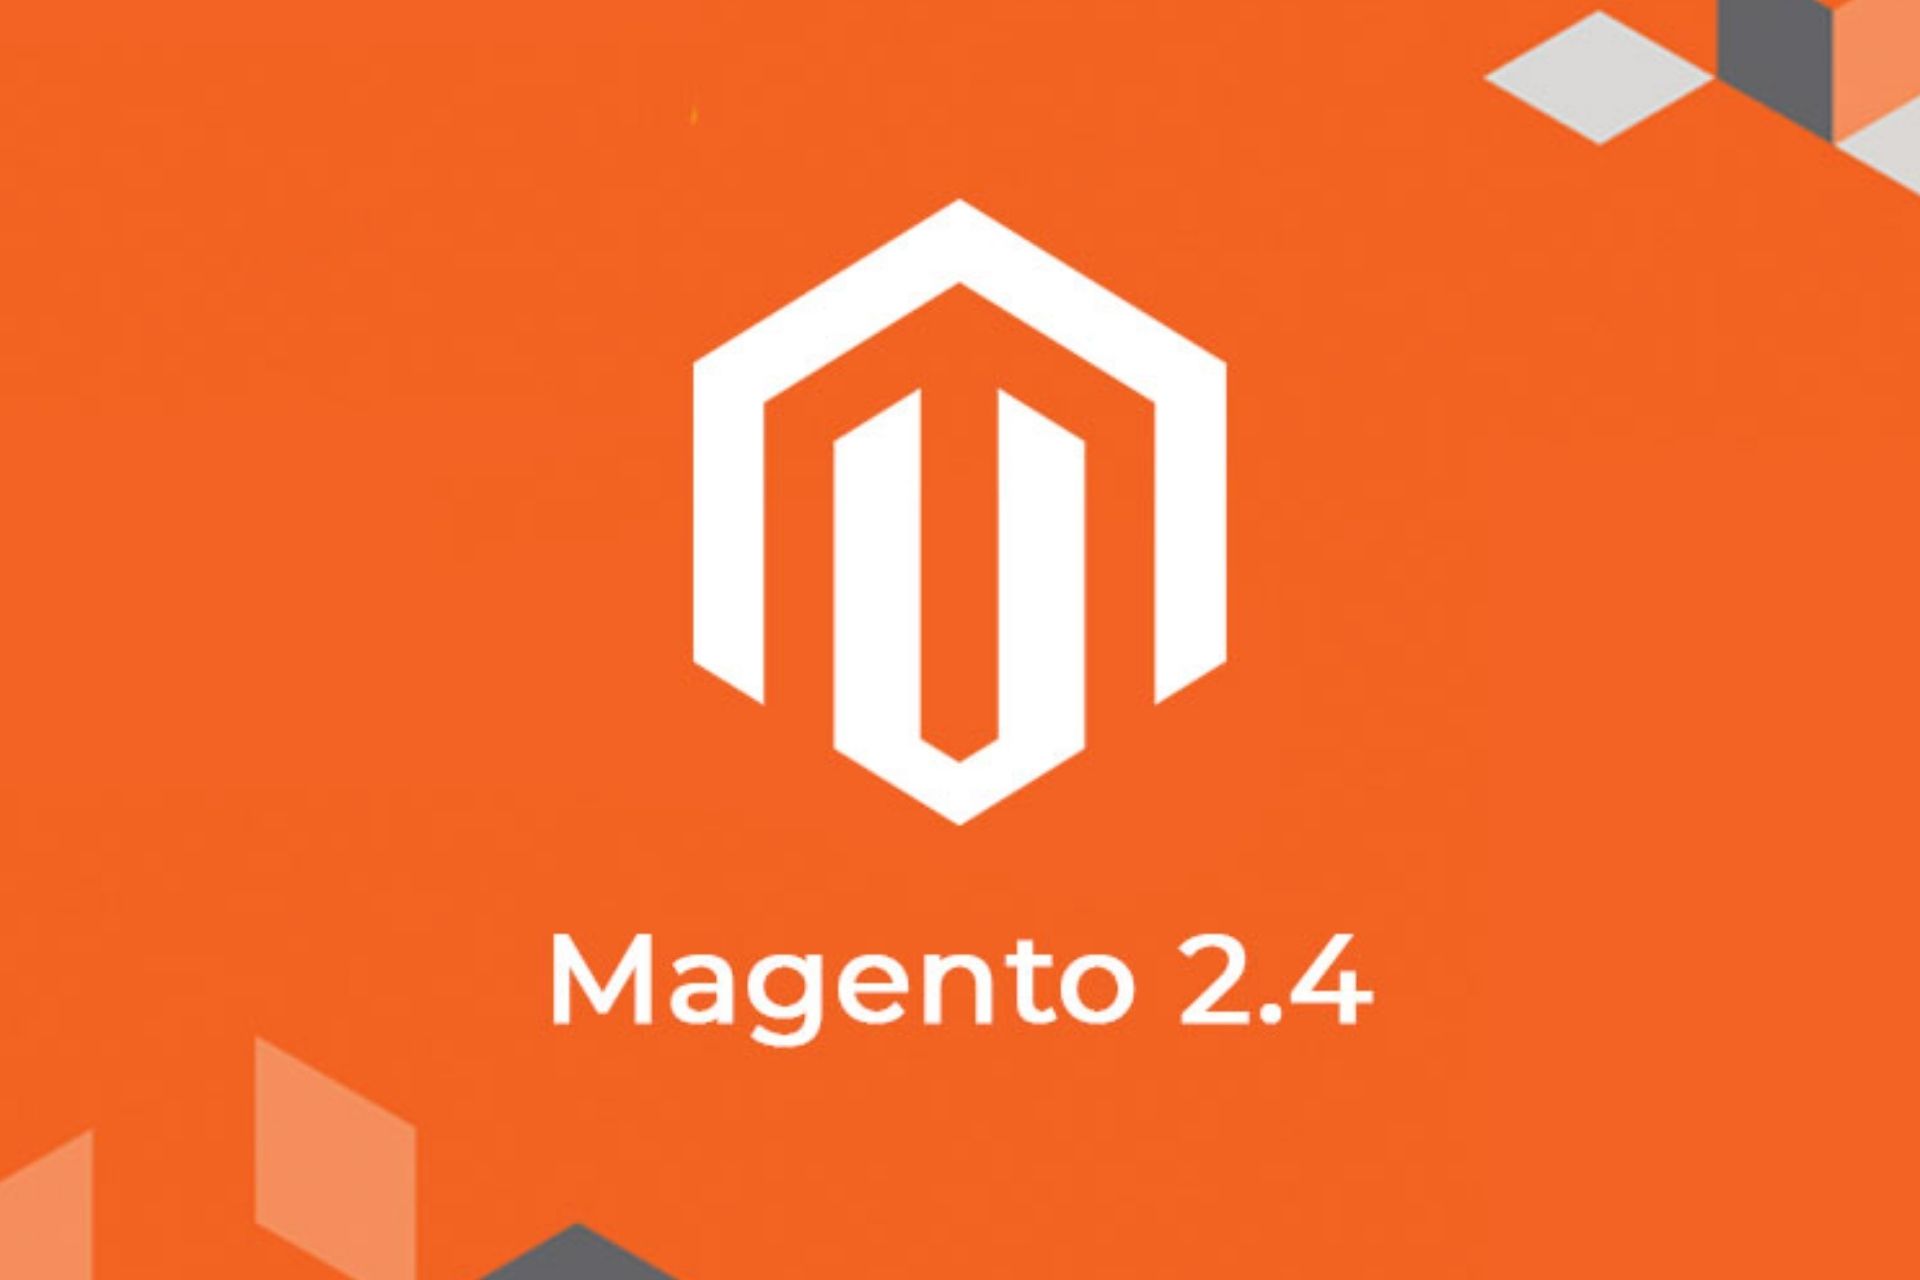 What’s New in Magento 2.4